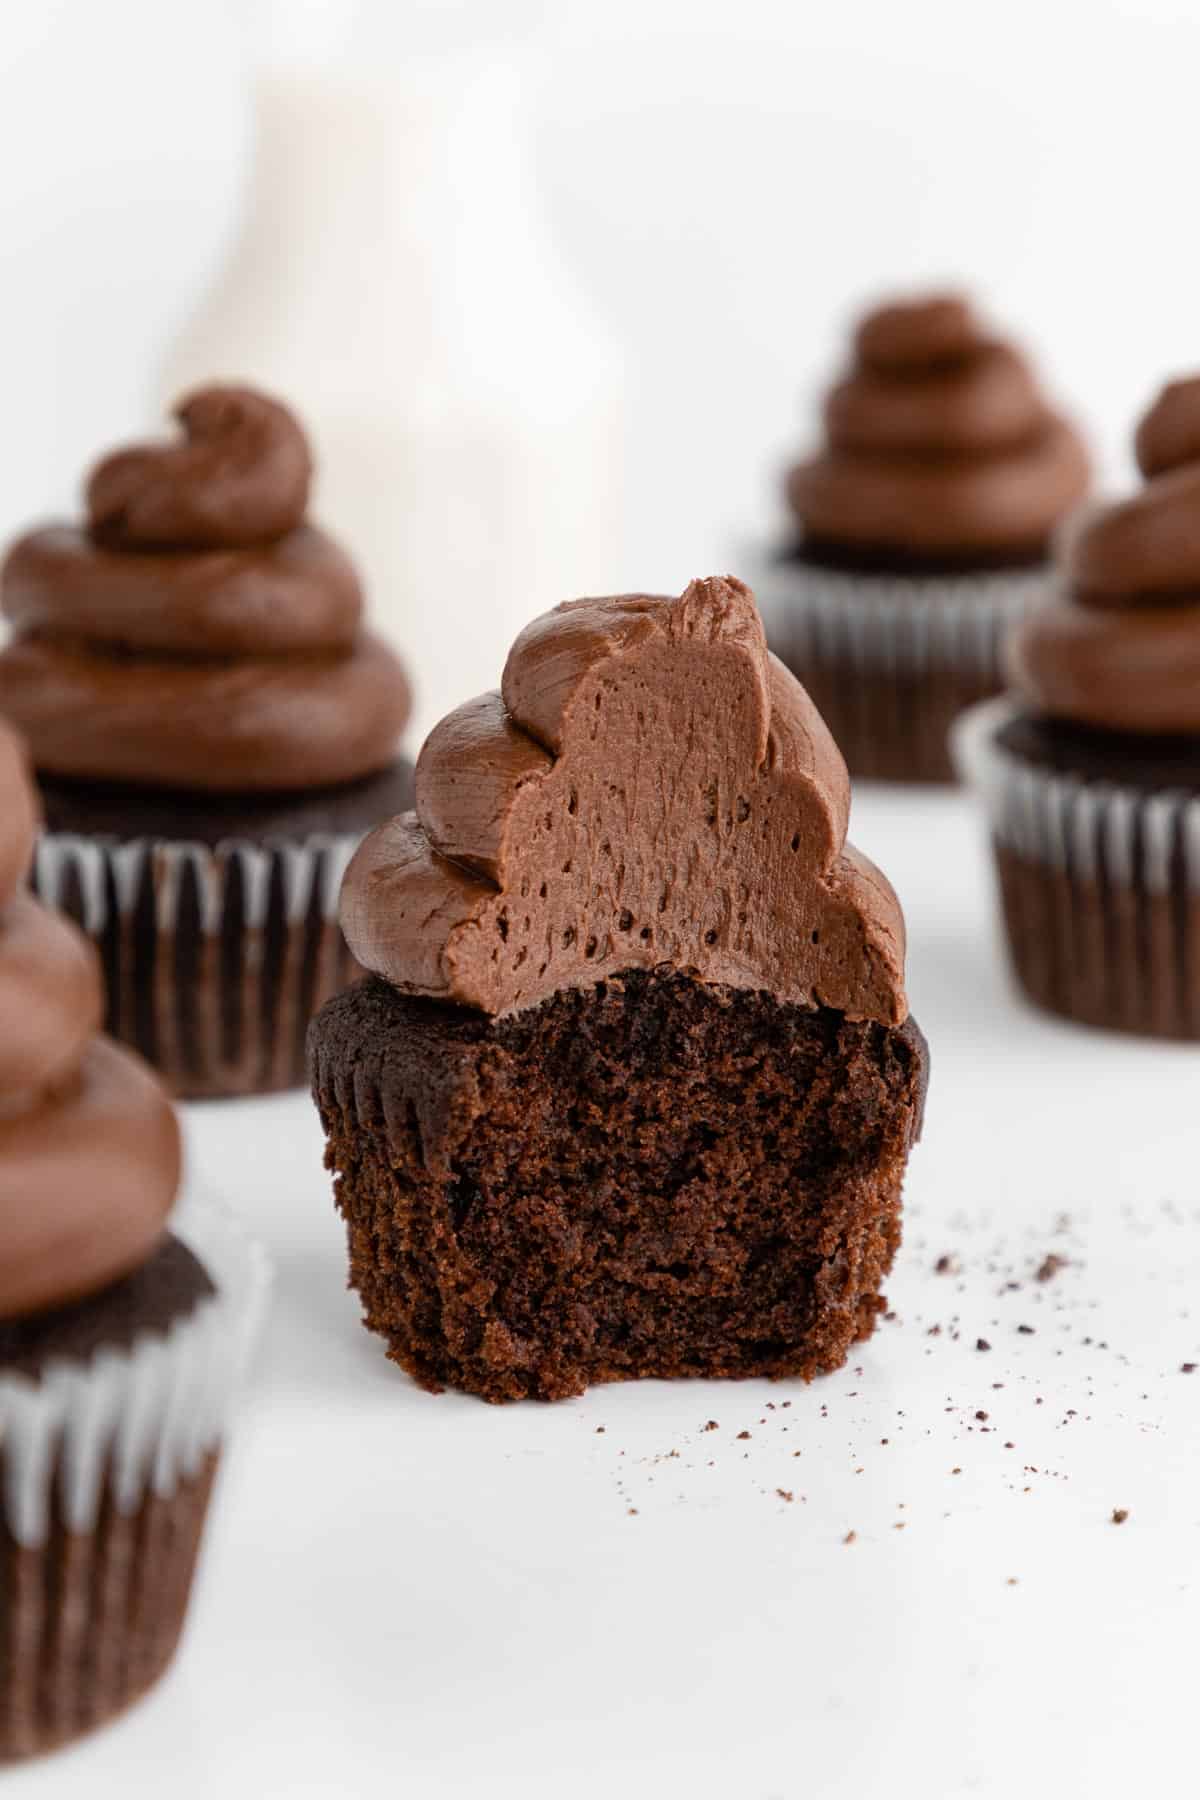 a partially bitten vegan chocolate cupcake with chocolate buttercream frosting, surrounded by more cupcakes